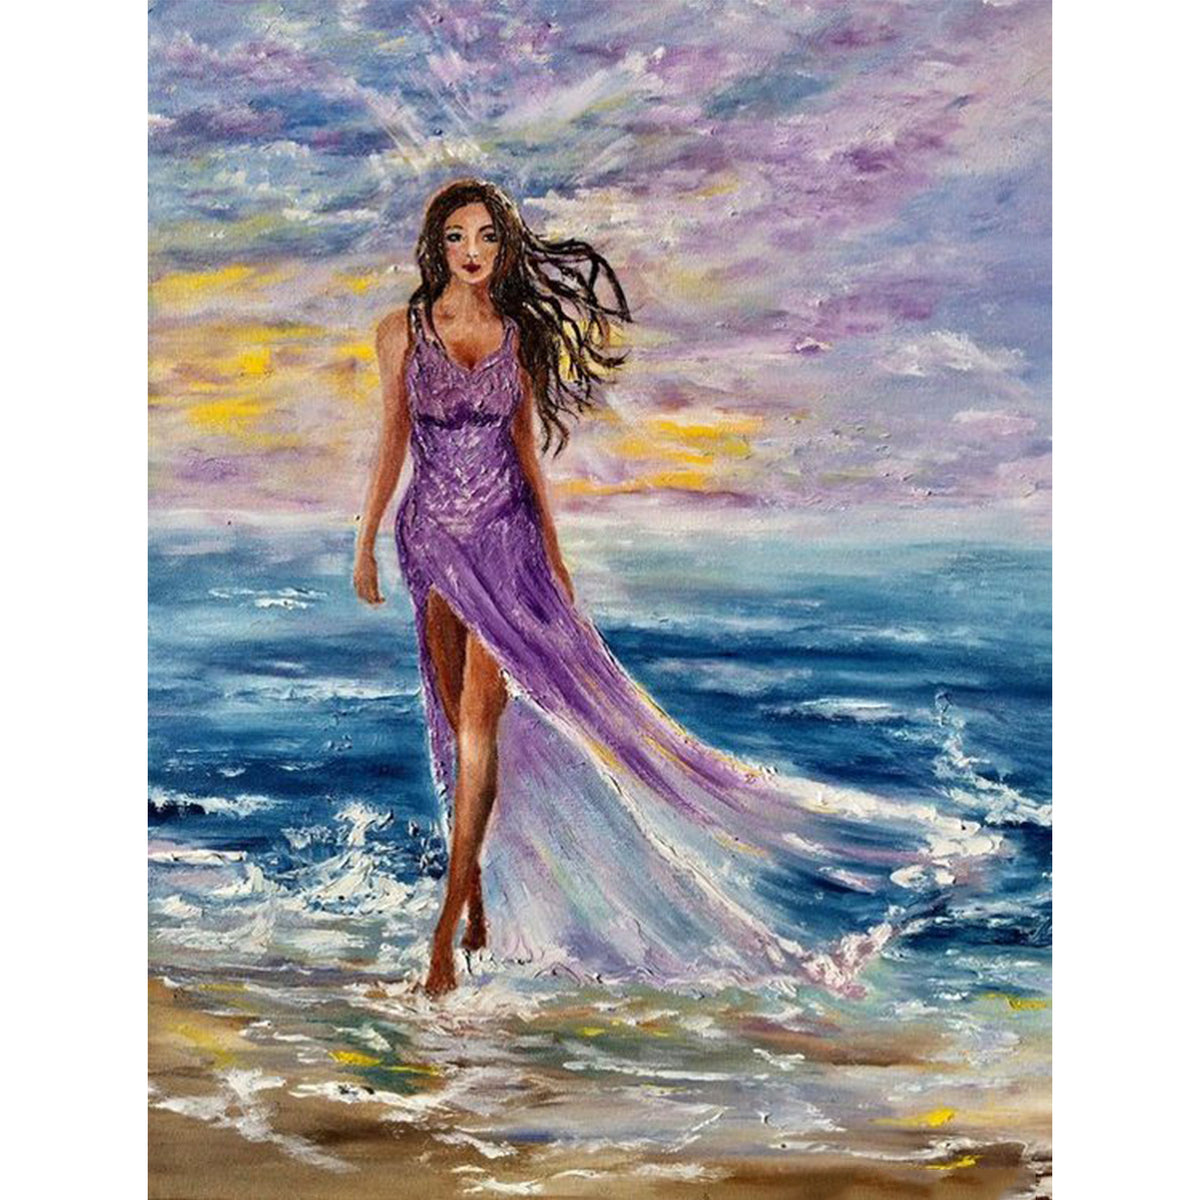 A Woman with a Purple Skirt by the Sea 5D Diamond Painting